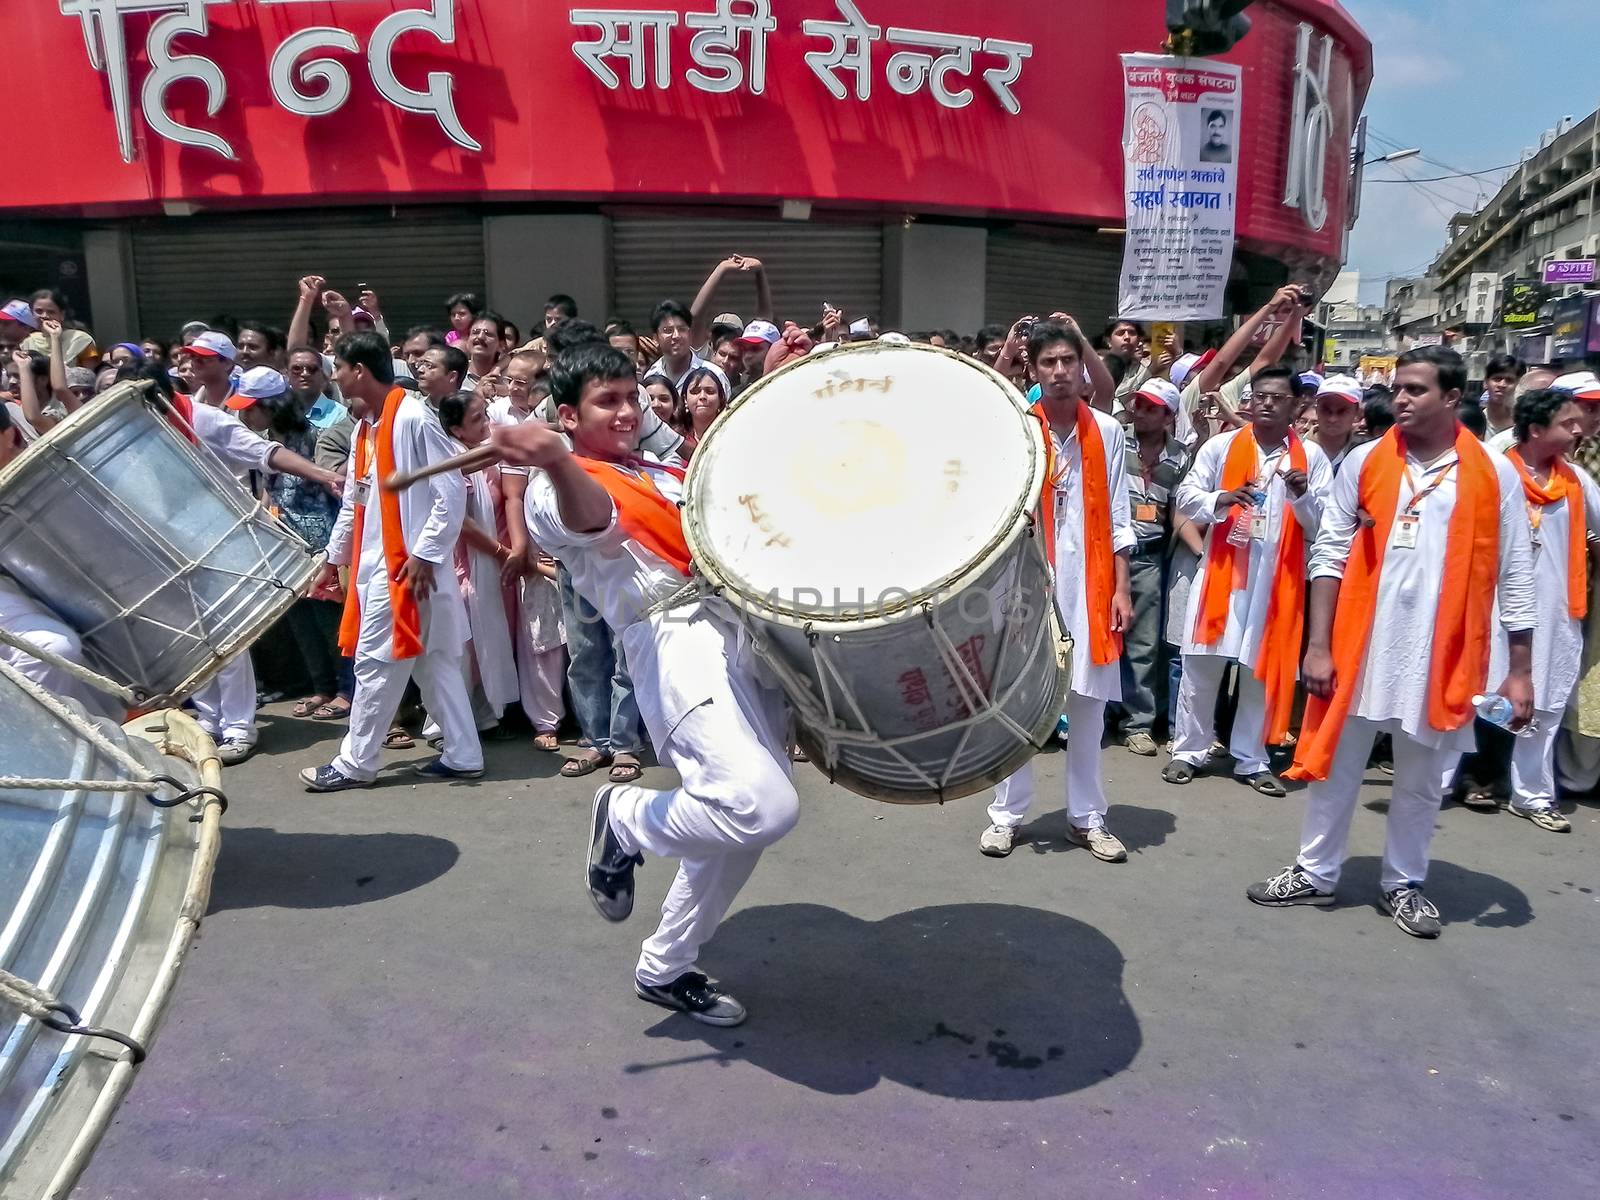 Pune,Maharashtra,India-September 22nd,2010: Youth beating huge traditional dhol during festival procession of ganesh as people in crowd watch.